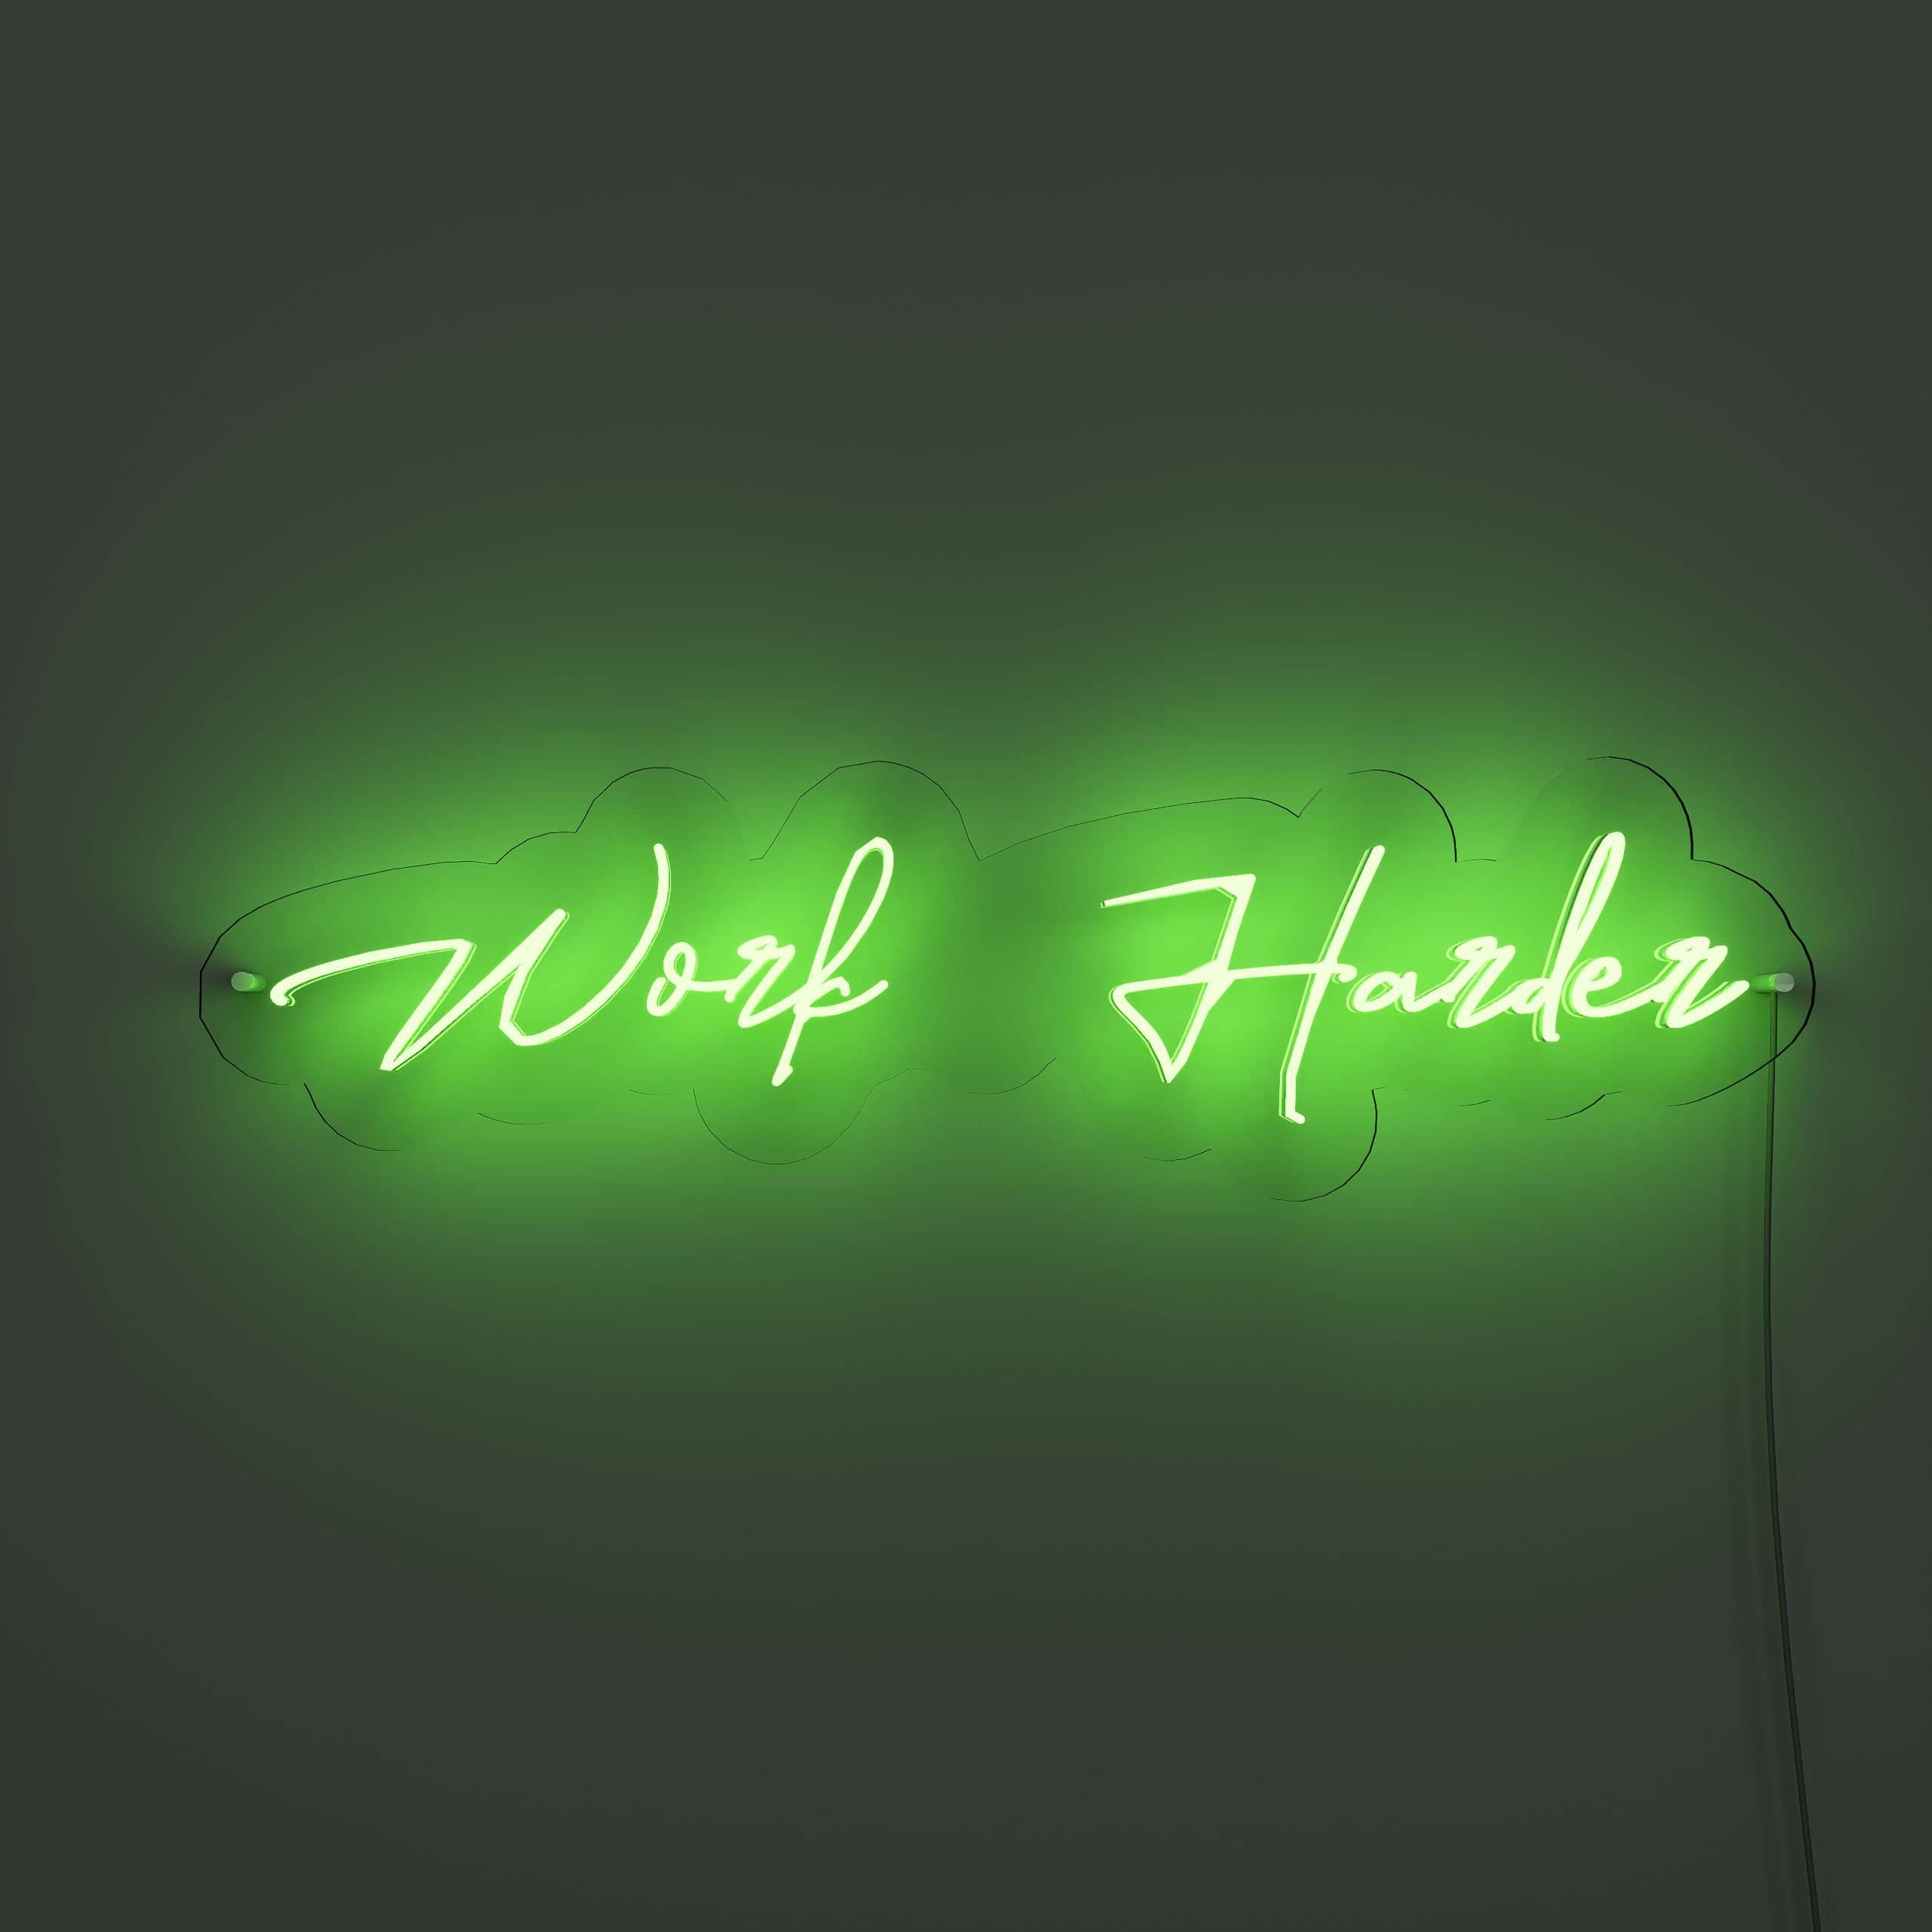 push-your-limits,-work-harder-and-shine-neon-sign-lite